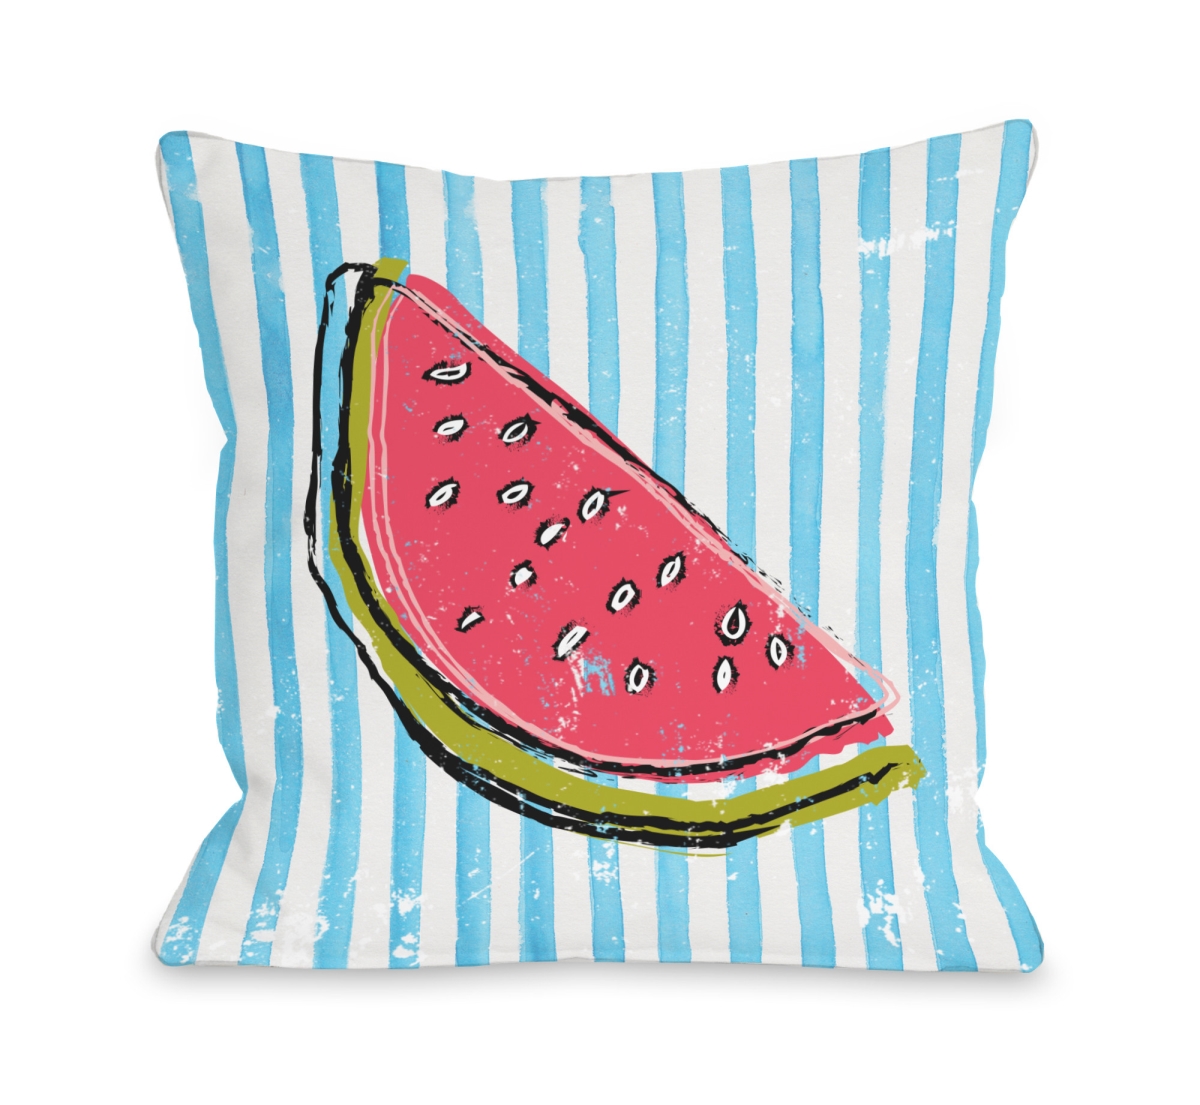 16 X 16 In. Whatthemelon Pillow, Blue & Multicolor